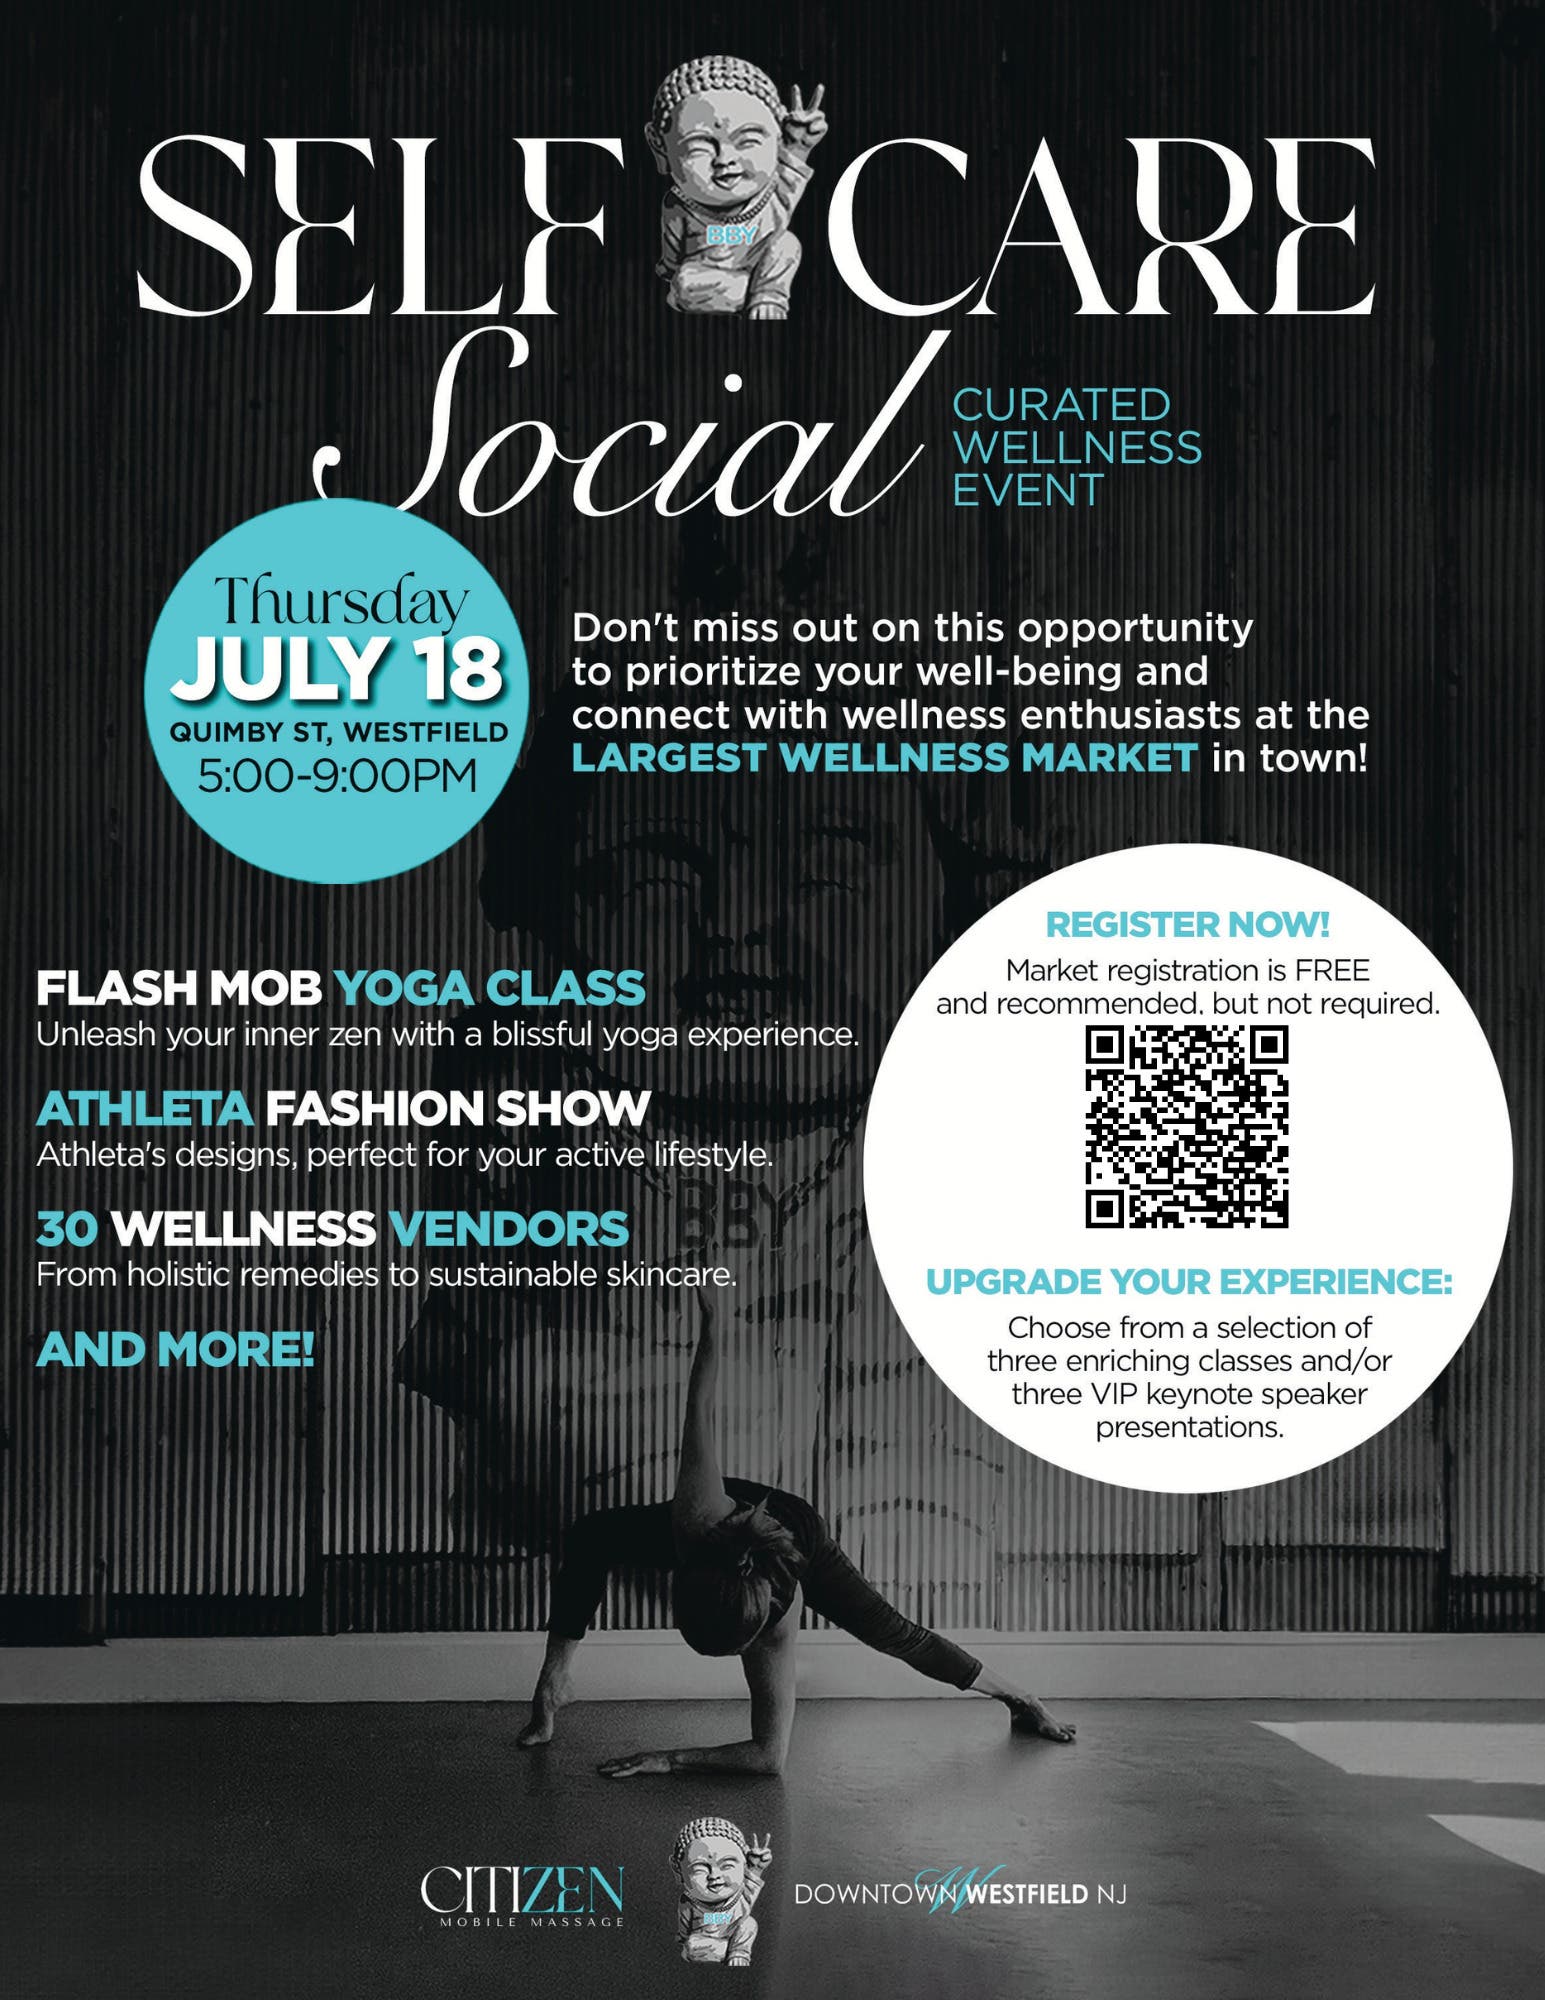 Self-Care Social returns to Downtown Westfield